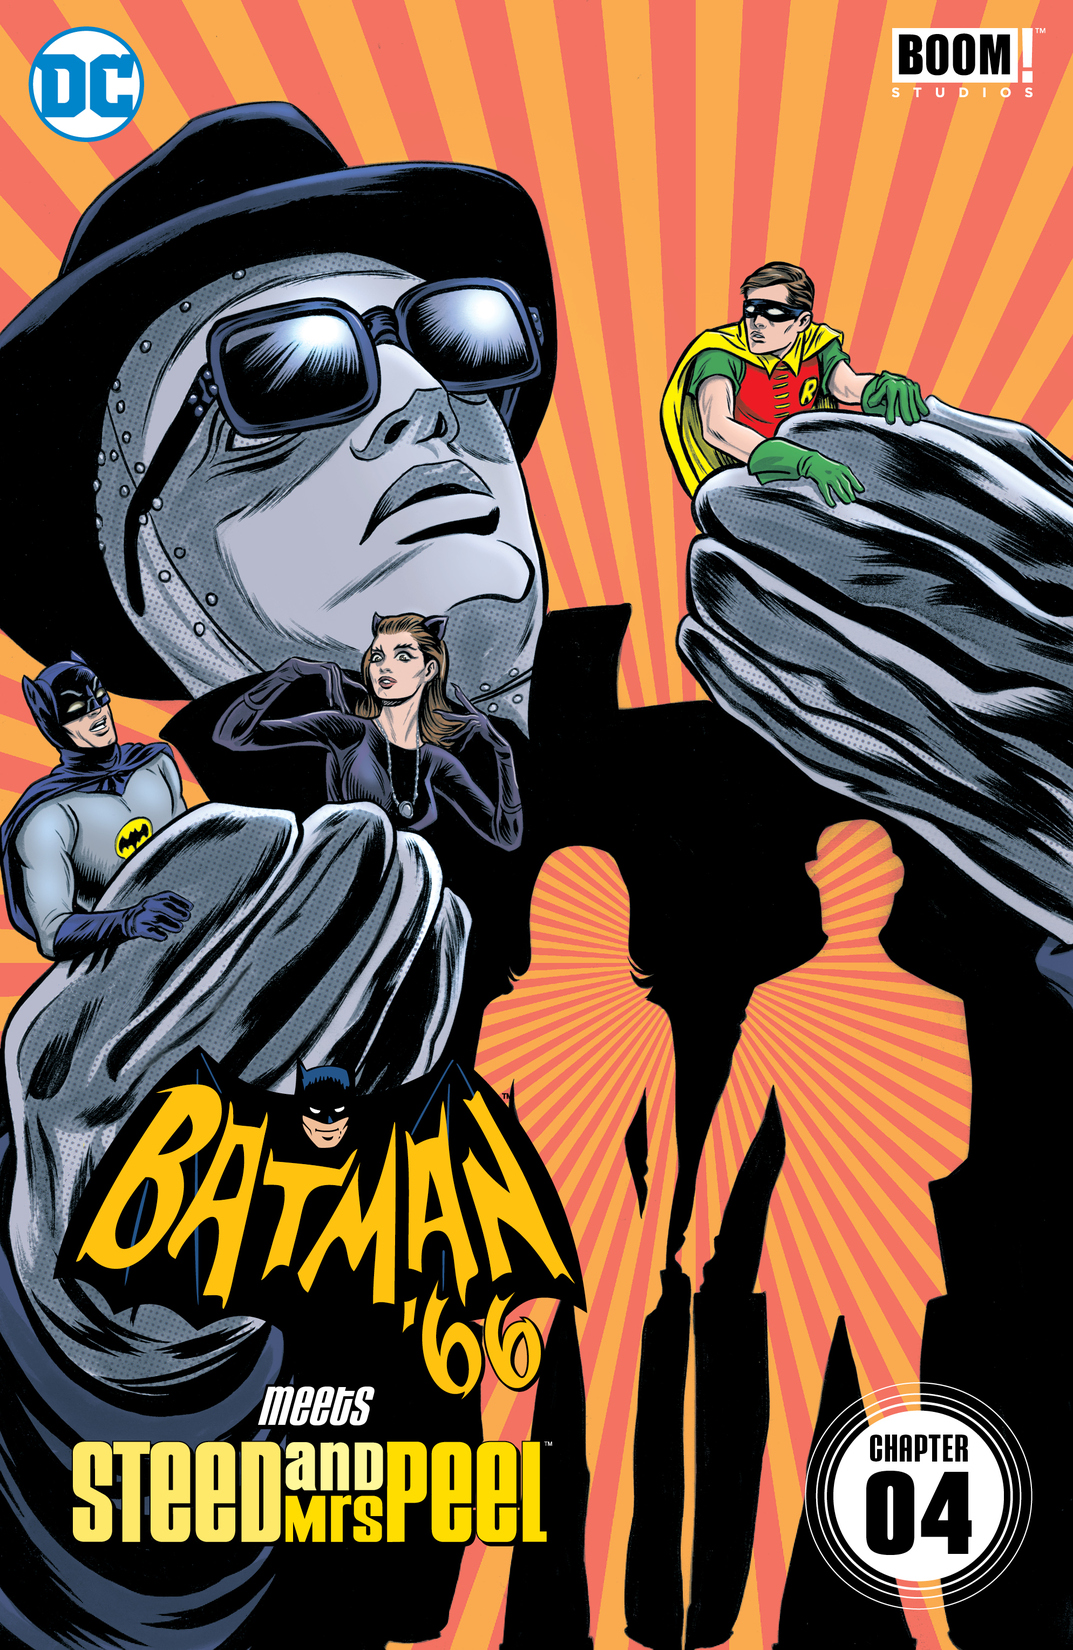 Batman '66 Meets Steed and Mrs Peel #4 preview images